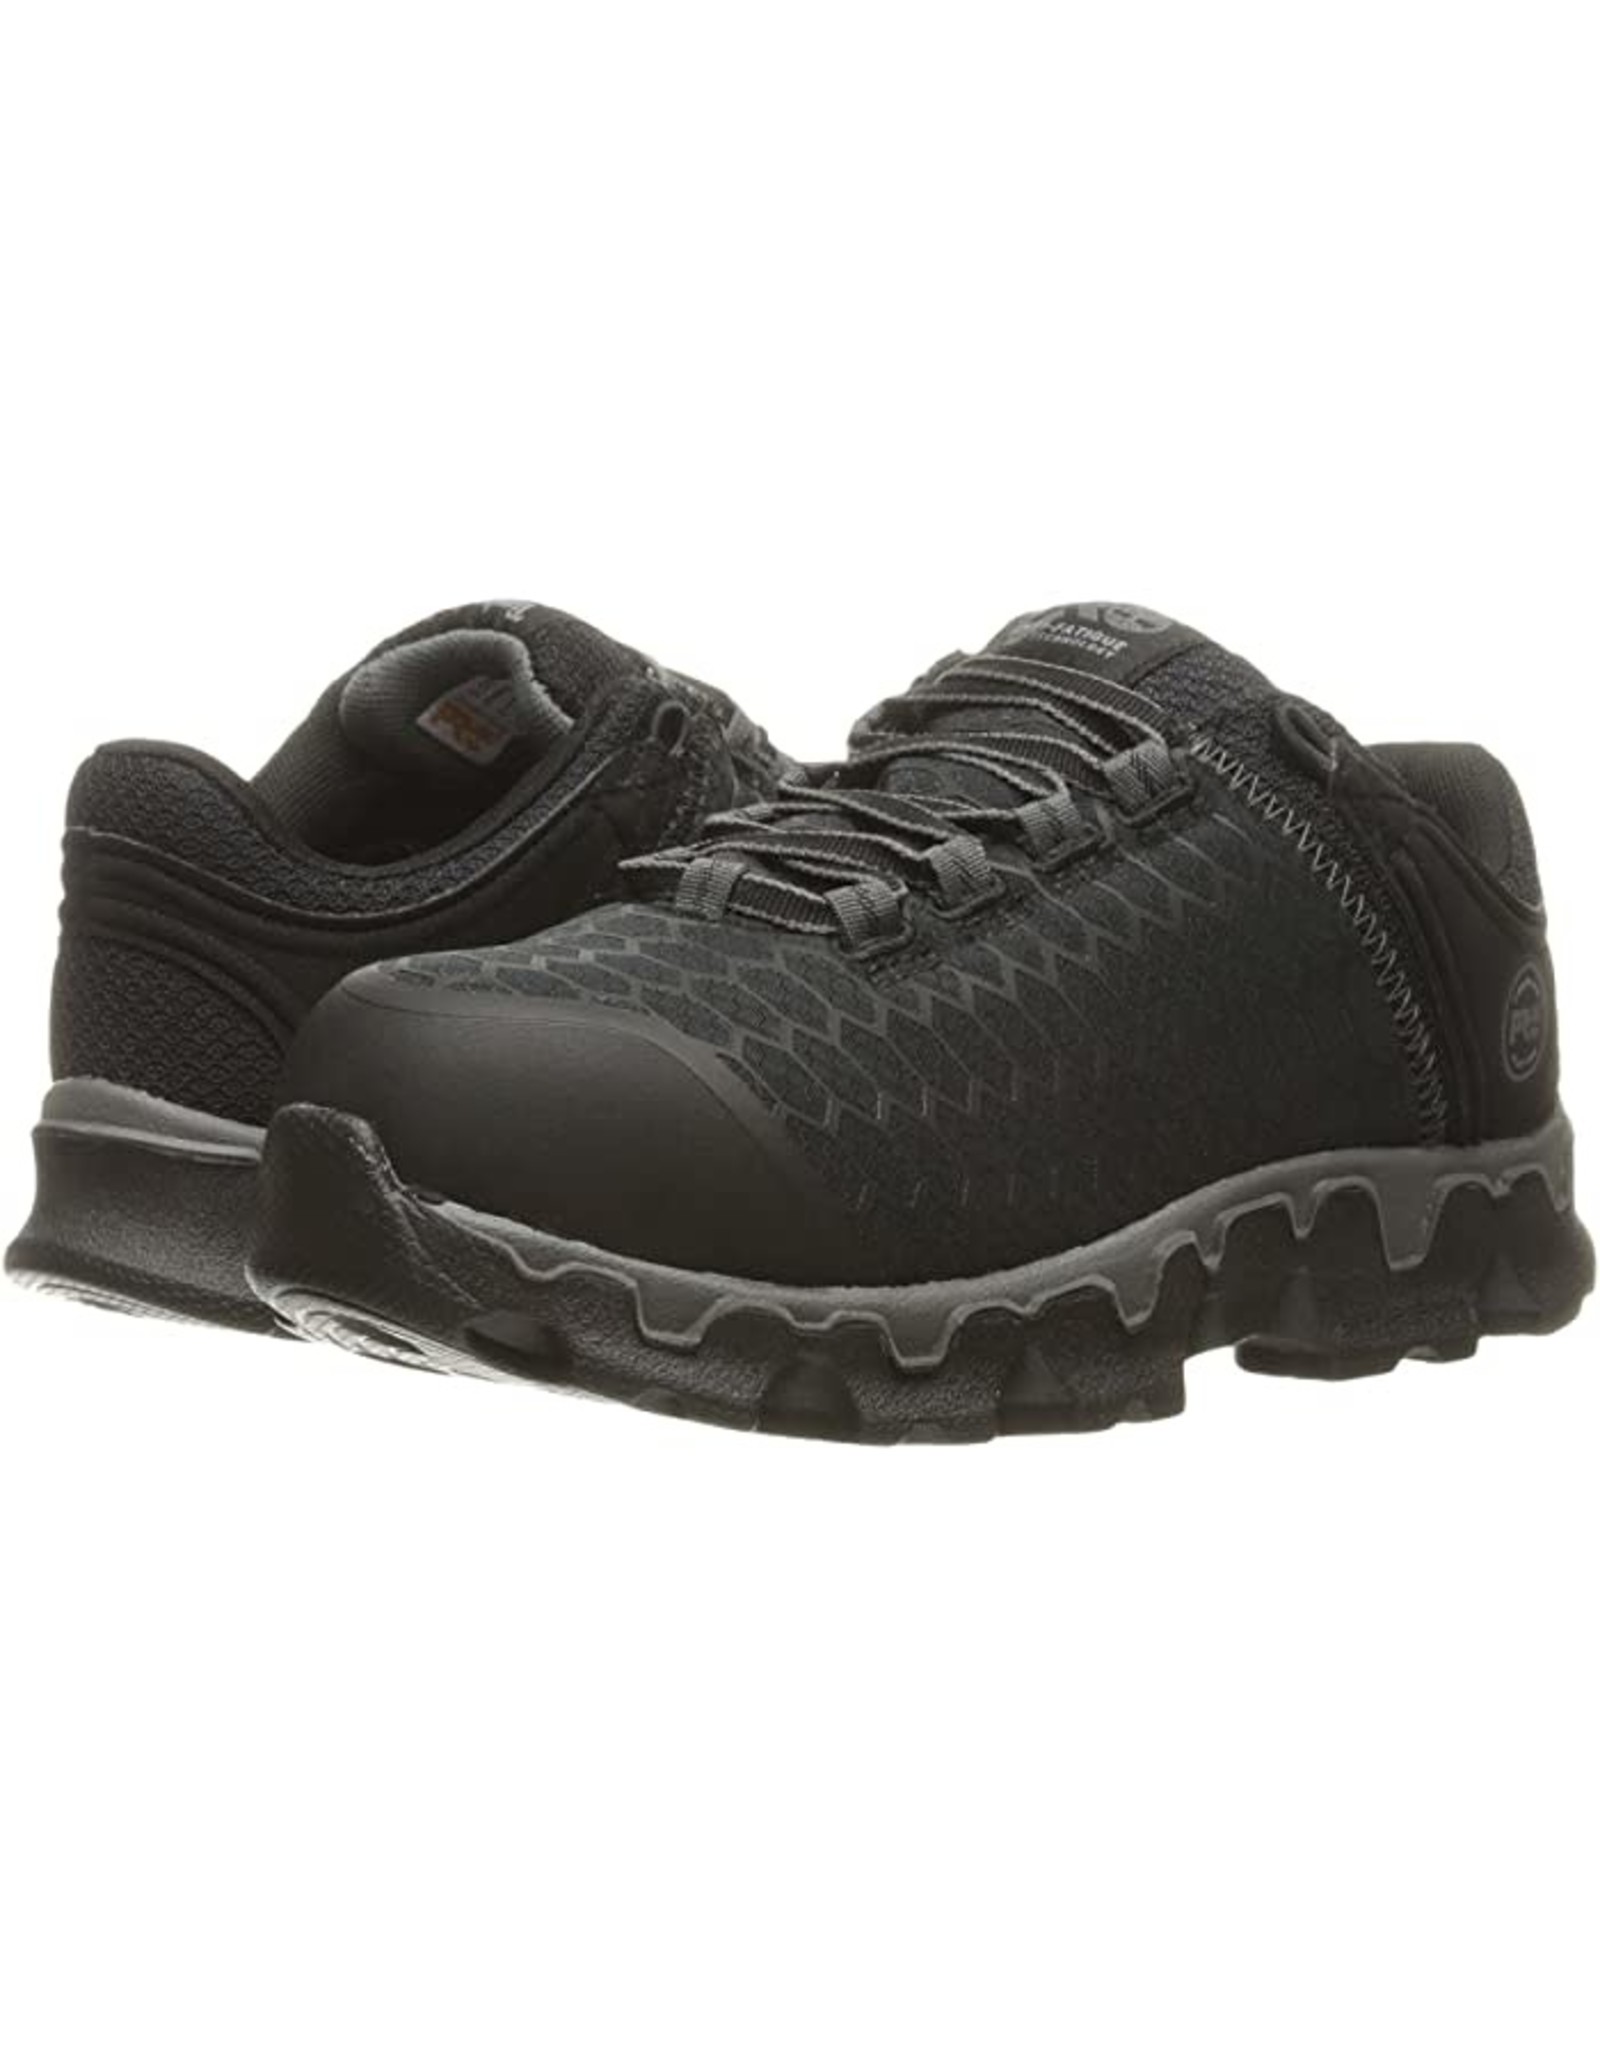 Timberland Ladies Alloy Toe Black TB0A1B7F Safety Work Shoes